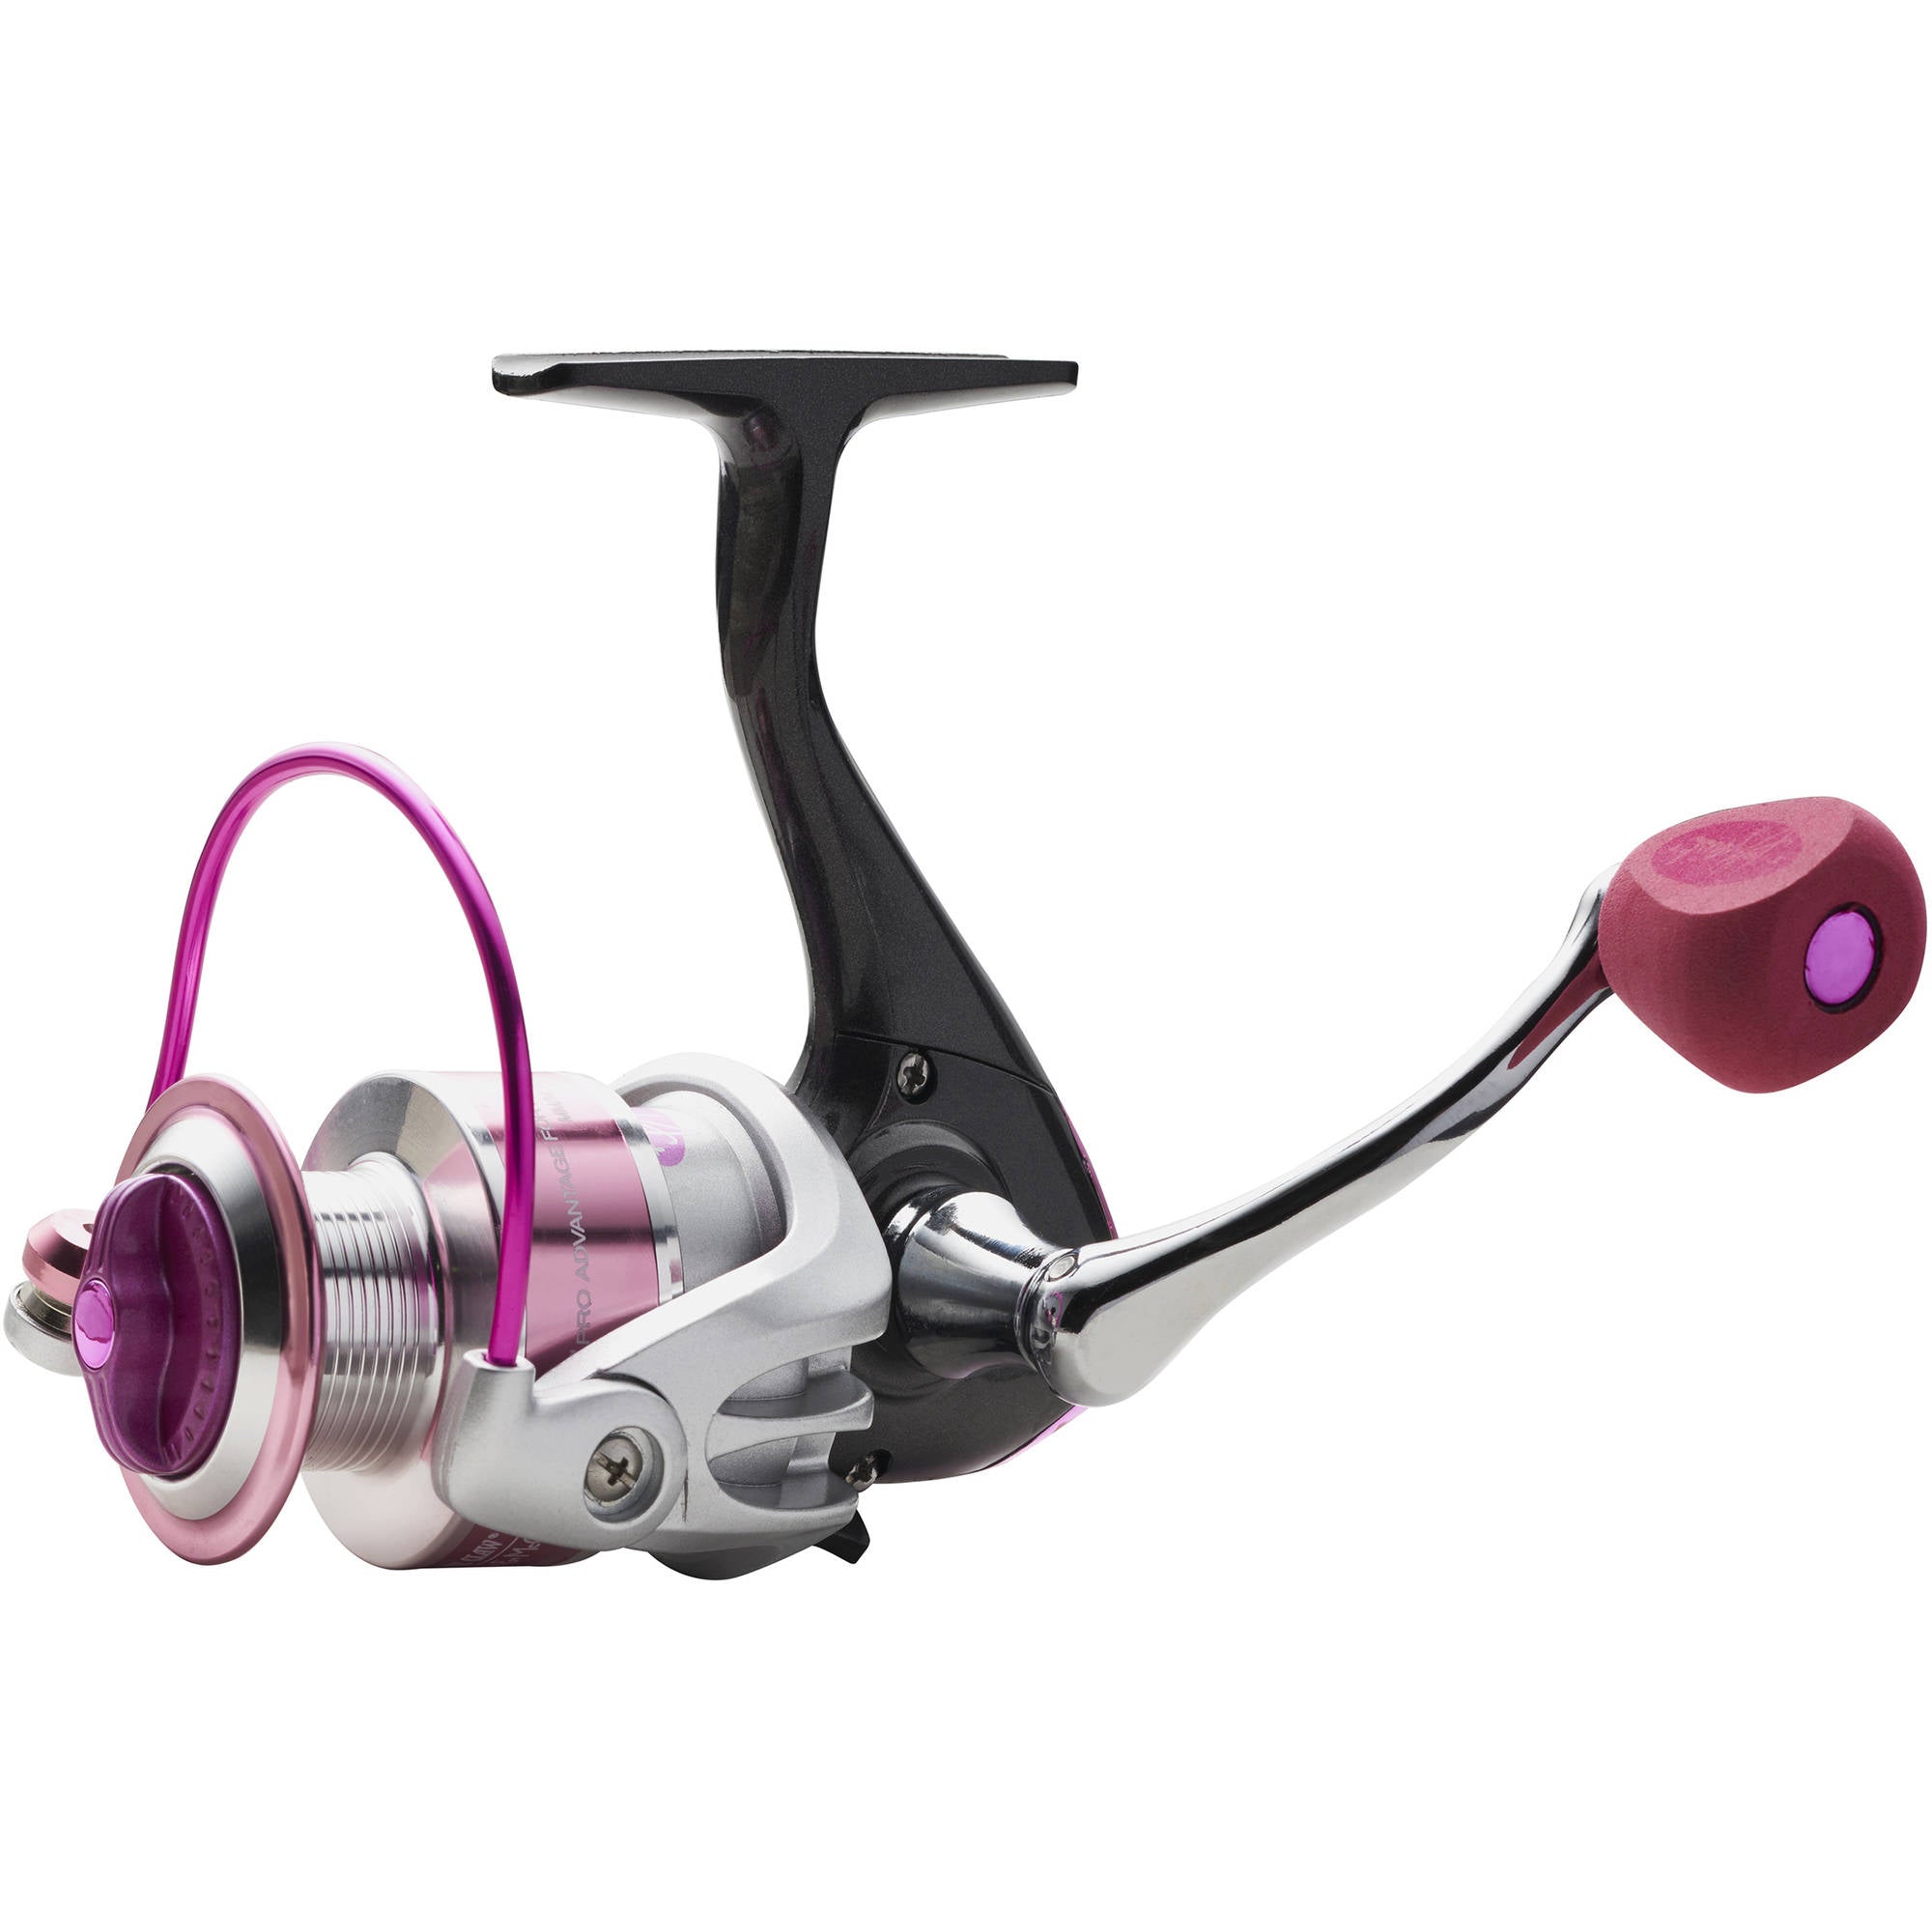 Wright & McGill Trait Crist Spinning Fishing Reel - Ships Quick!